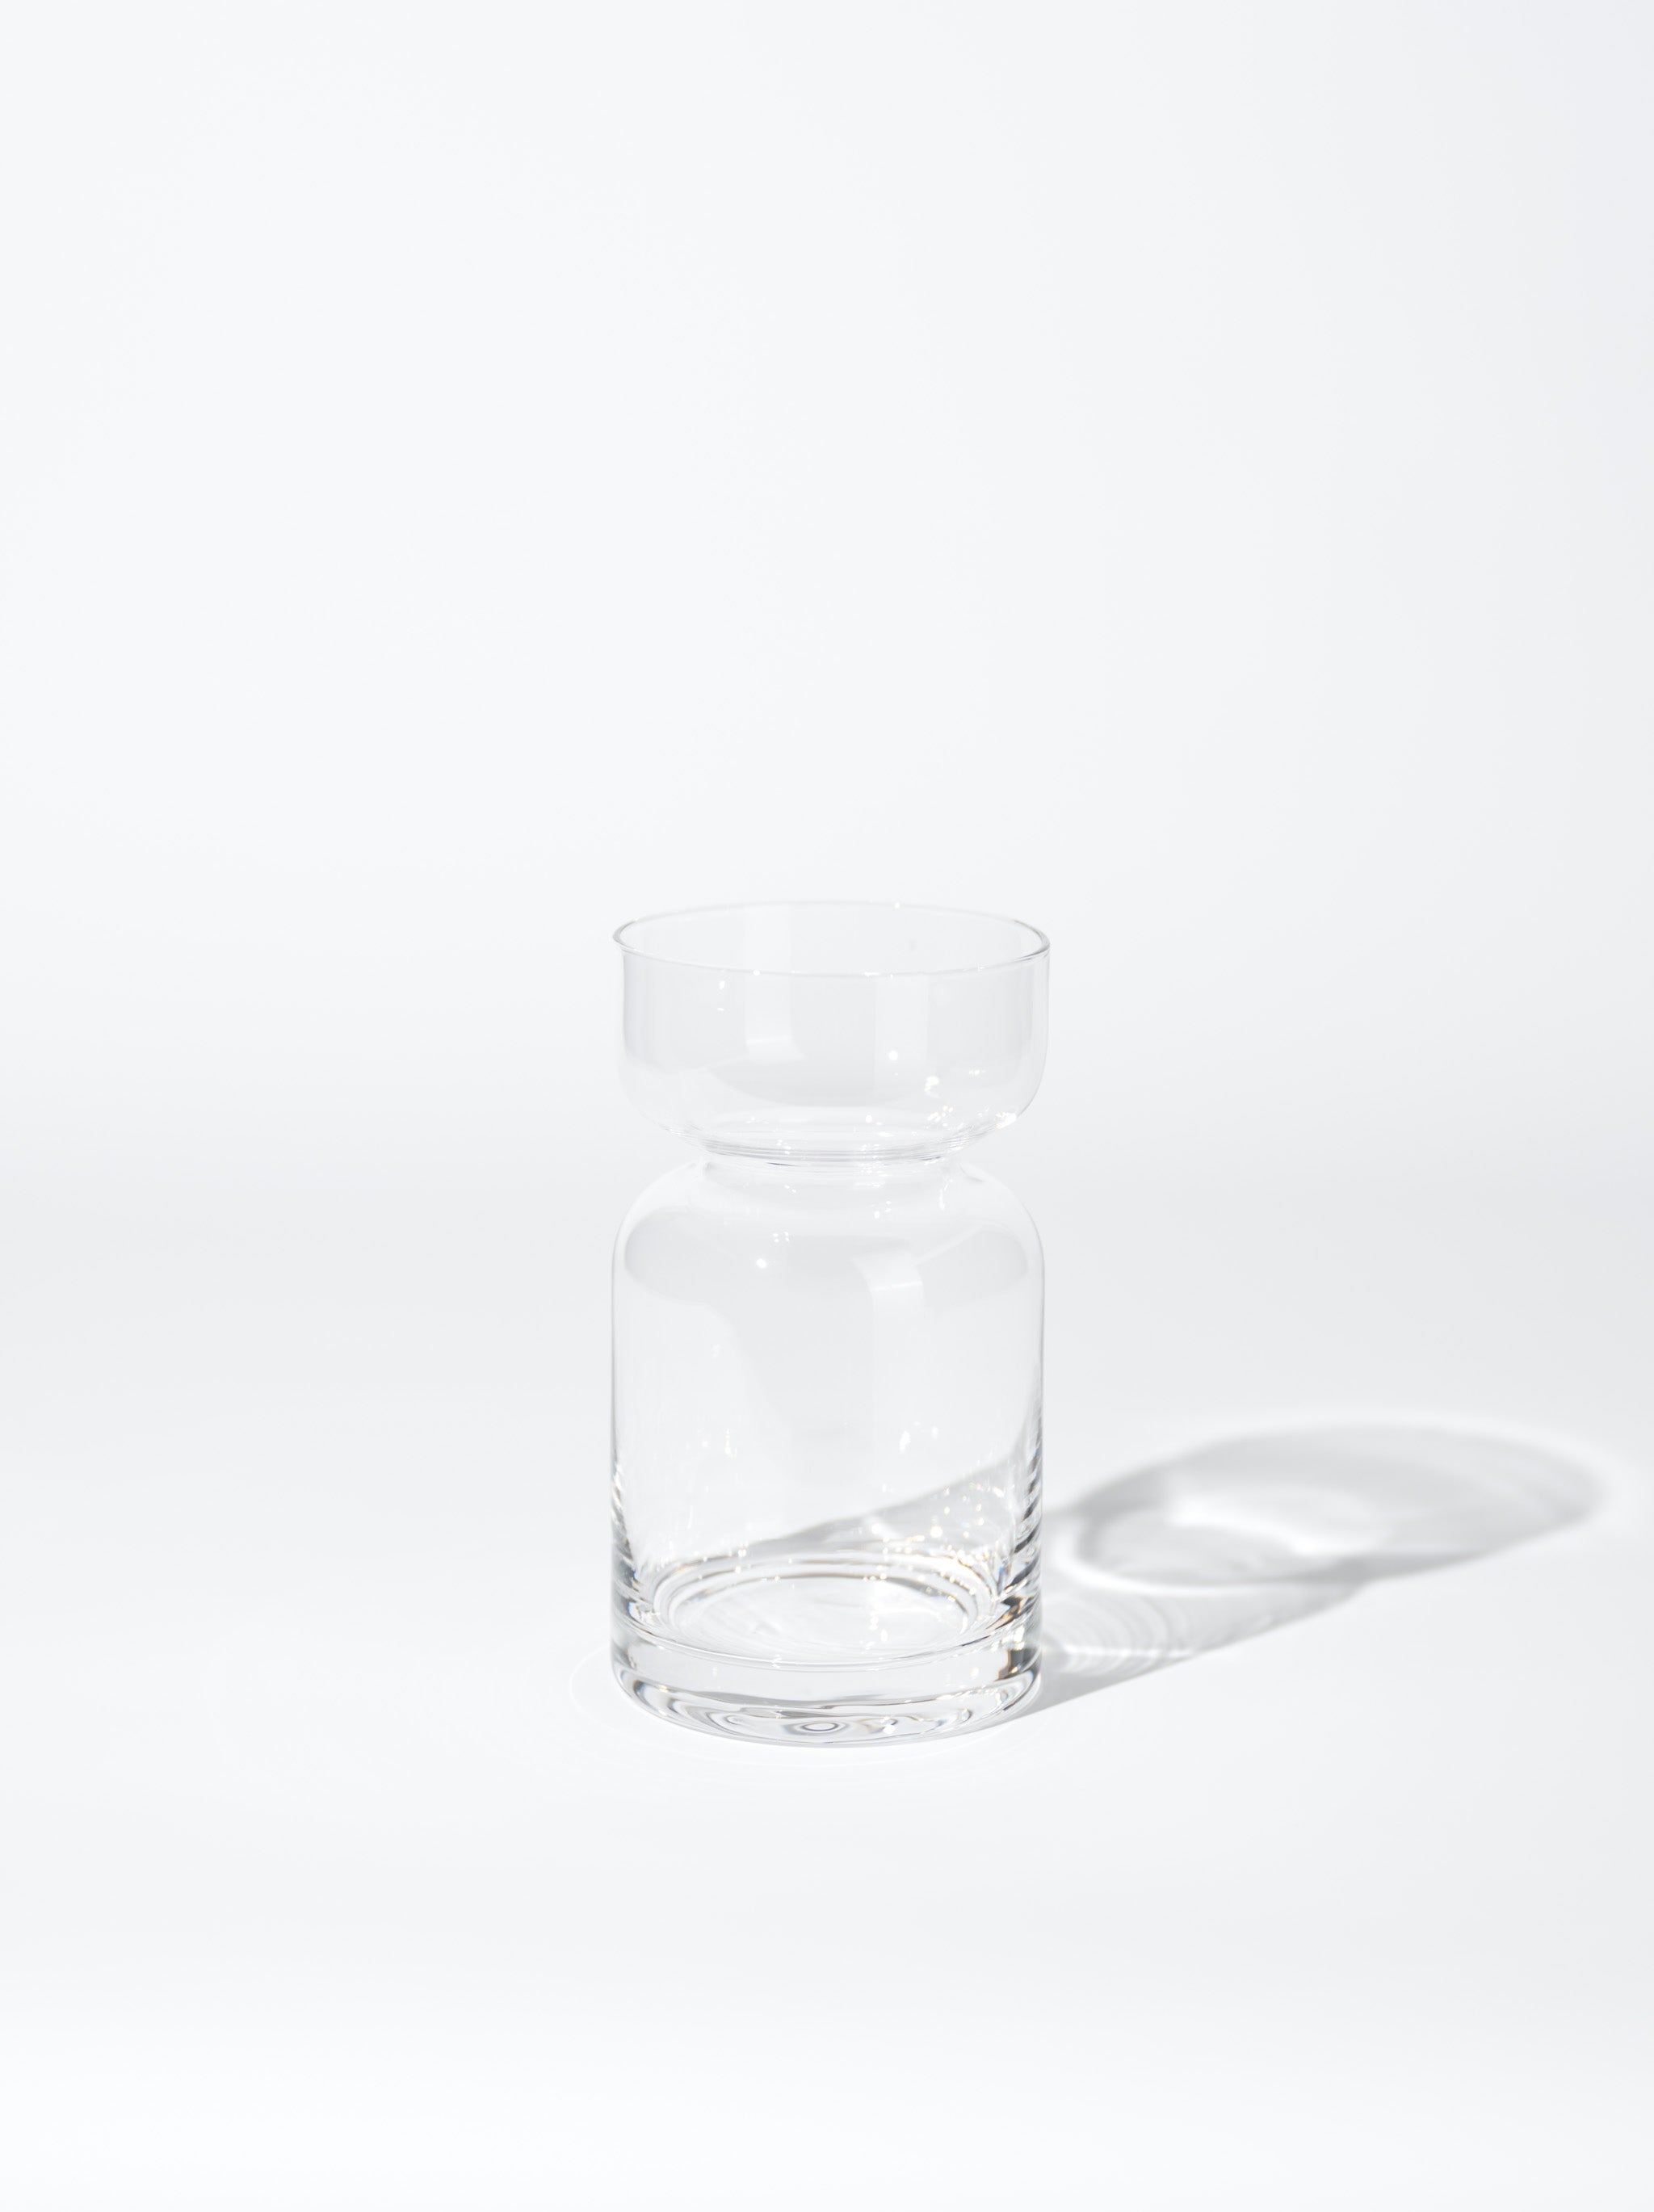 Hourglass Drinking Glass, Set of 4